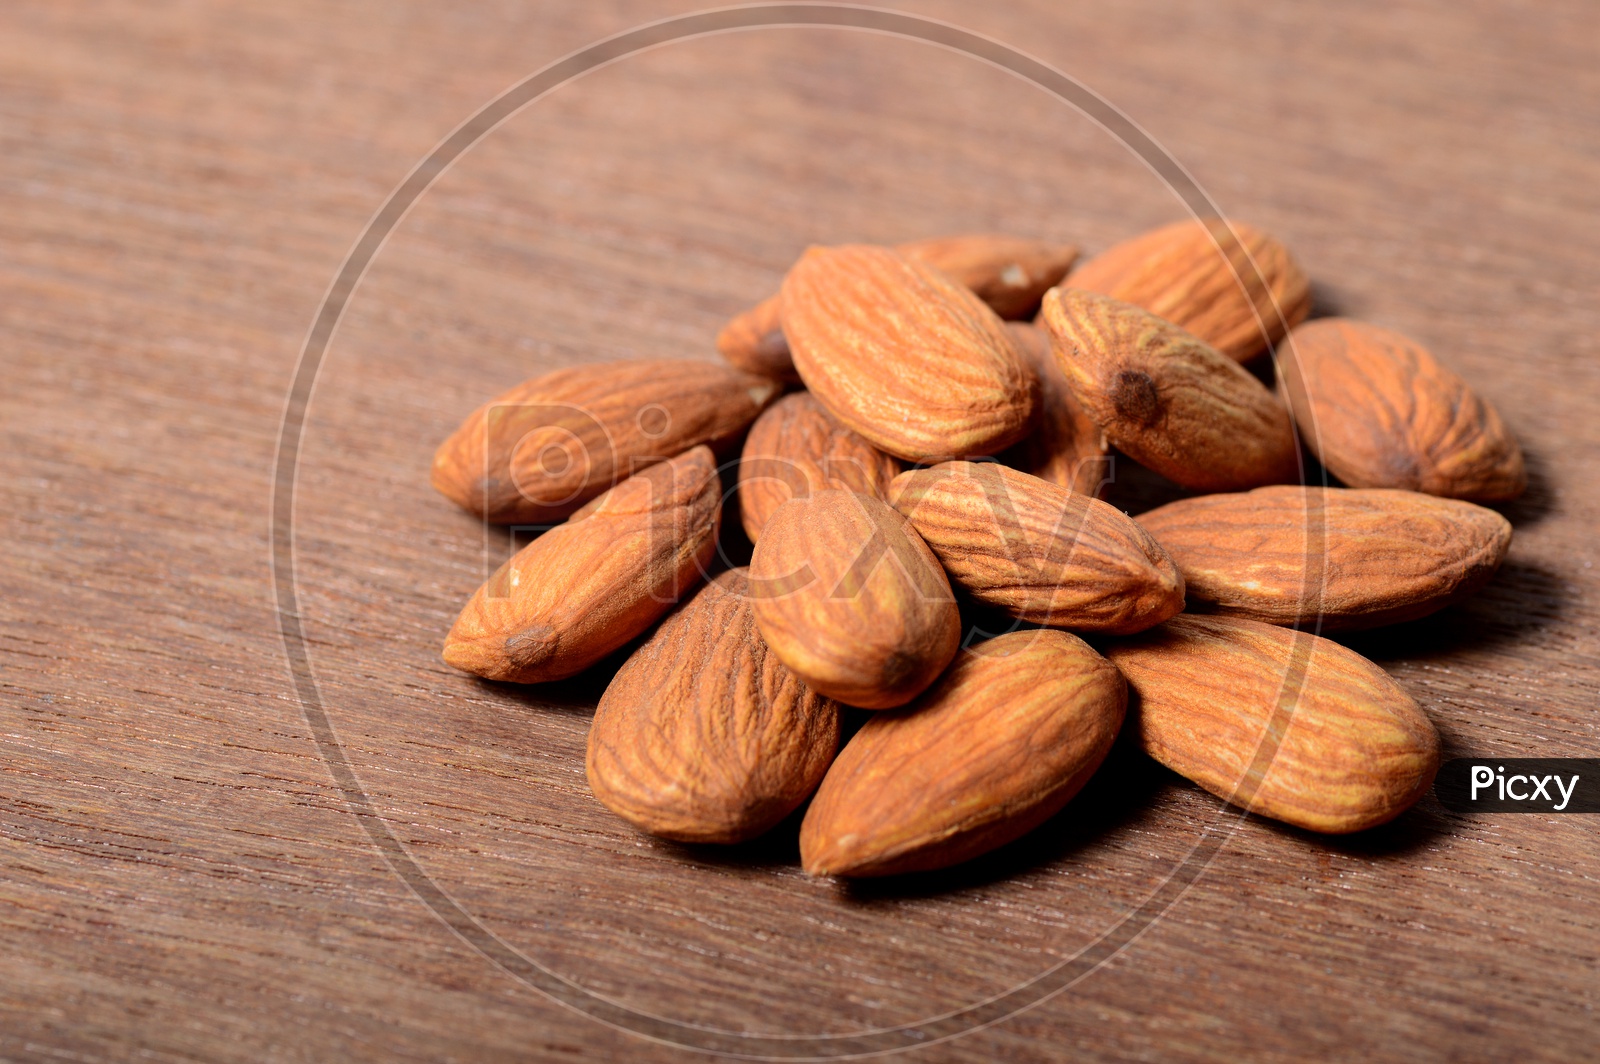 Almonds Or Badam  Nuts On An Isolated Wooden Background